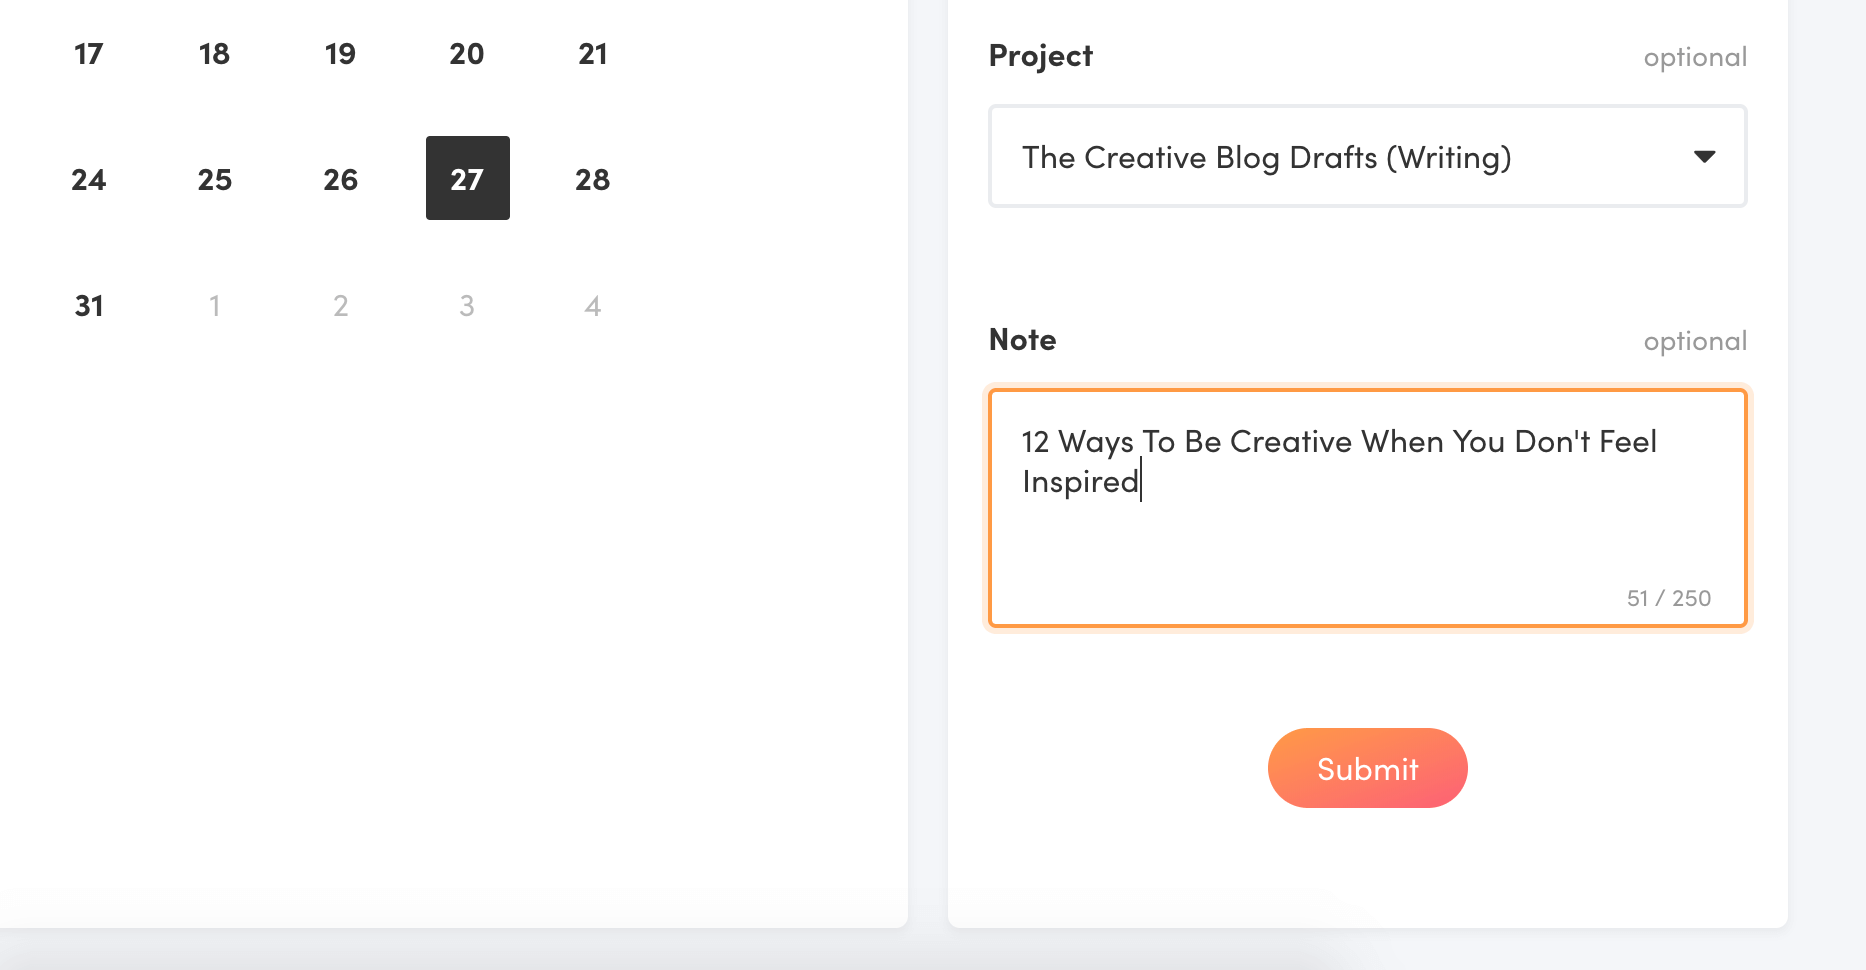 Adding a note when creating projects